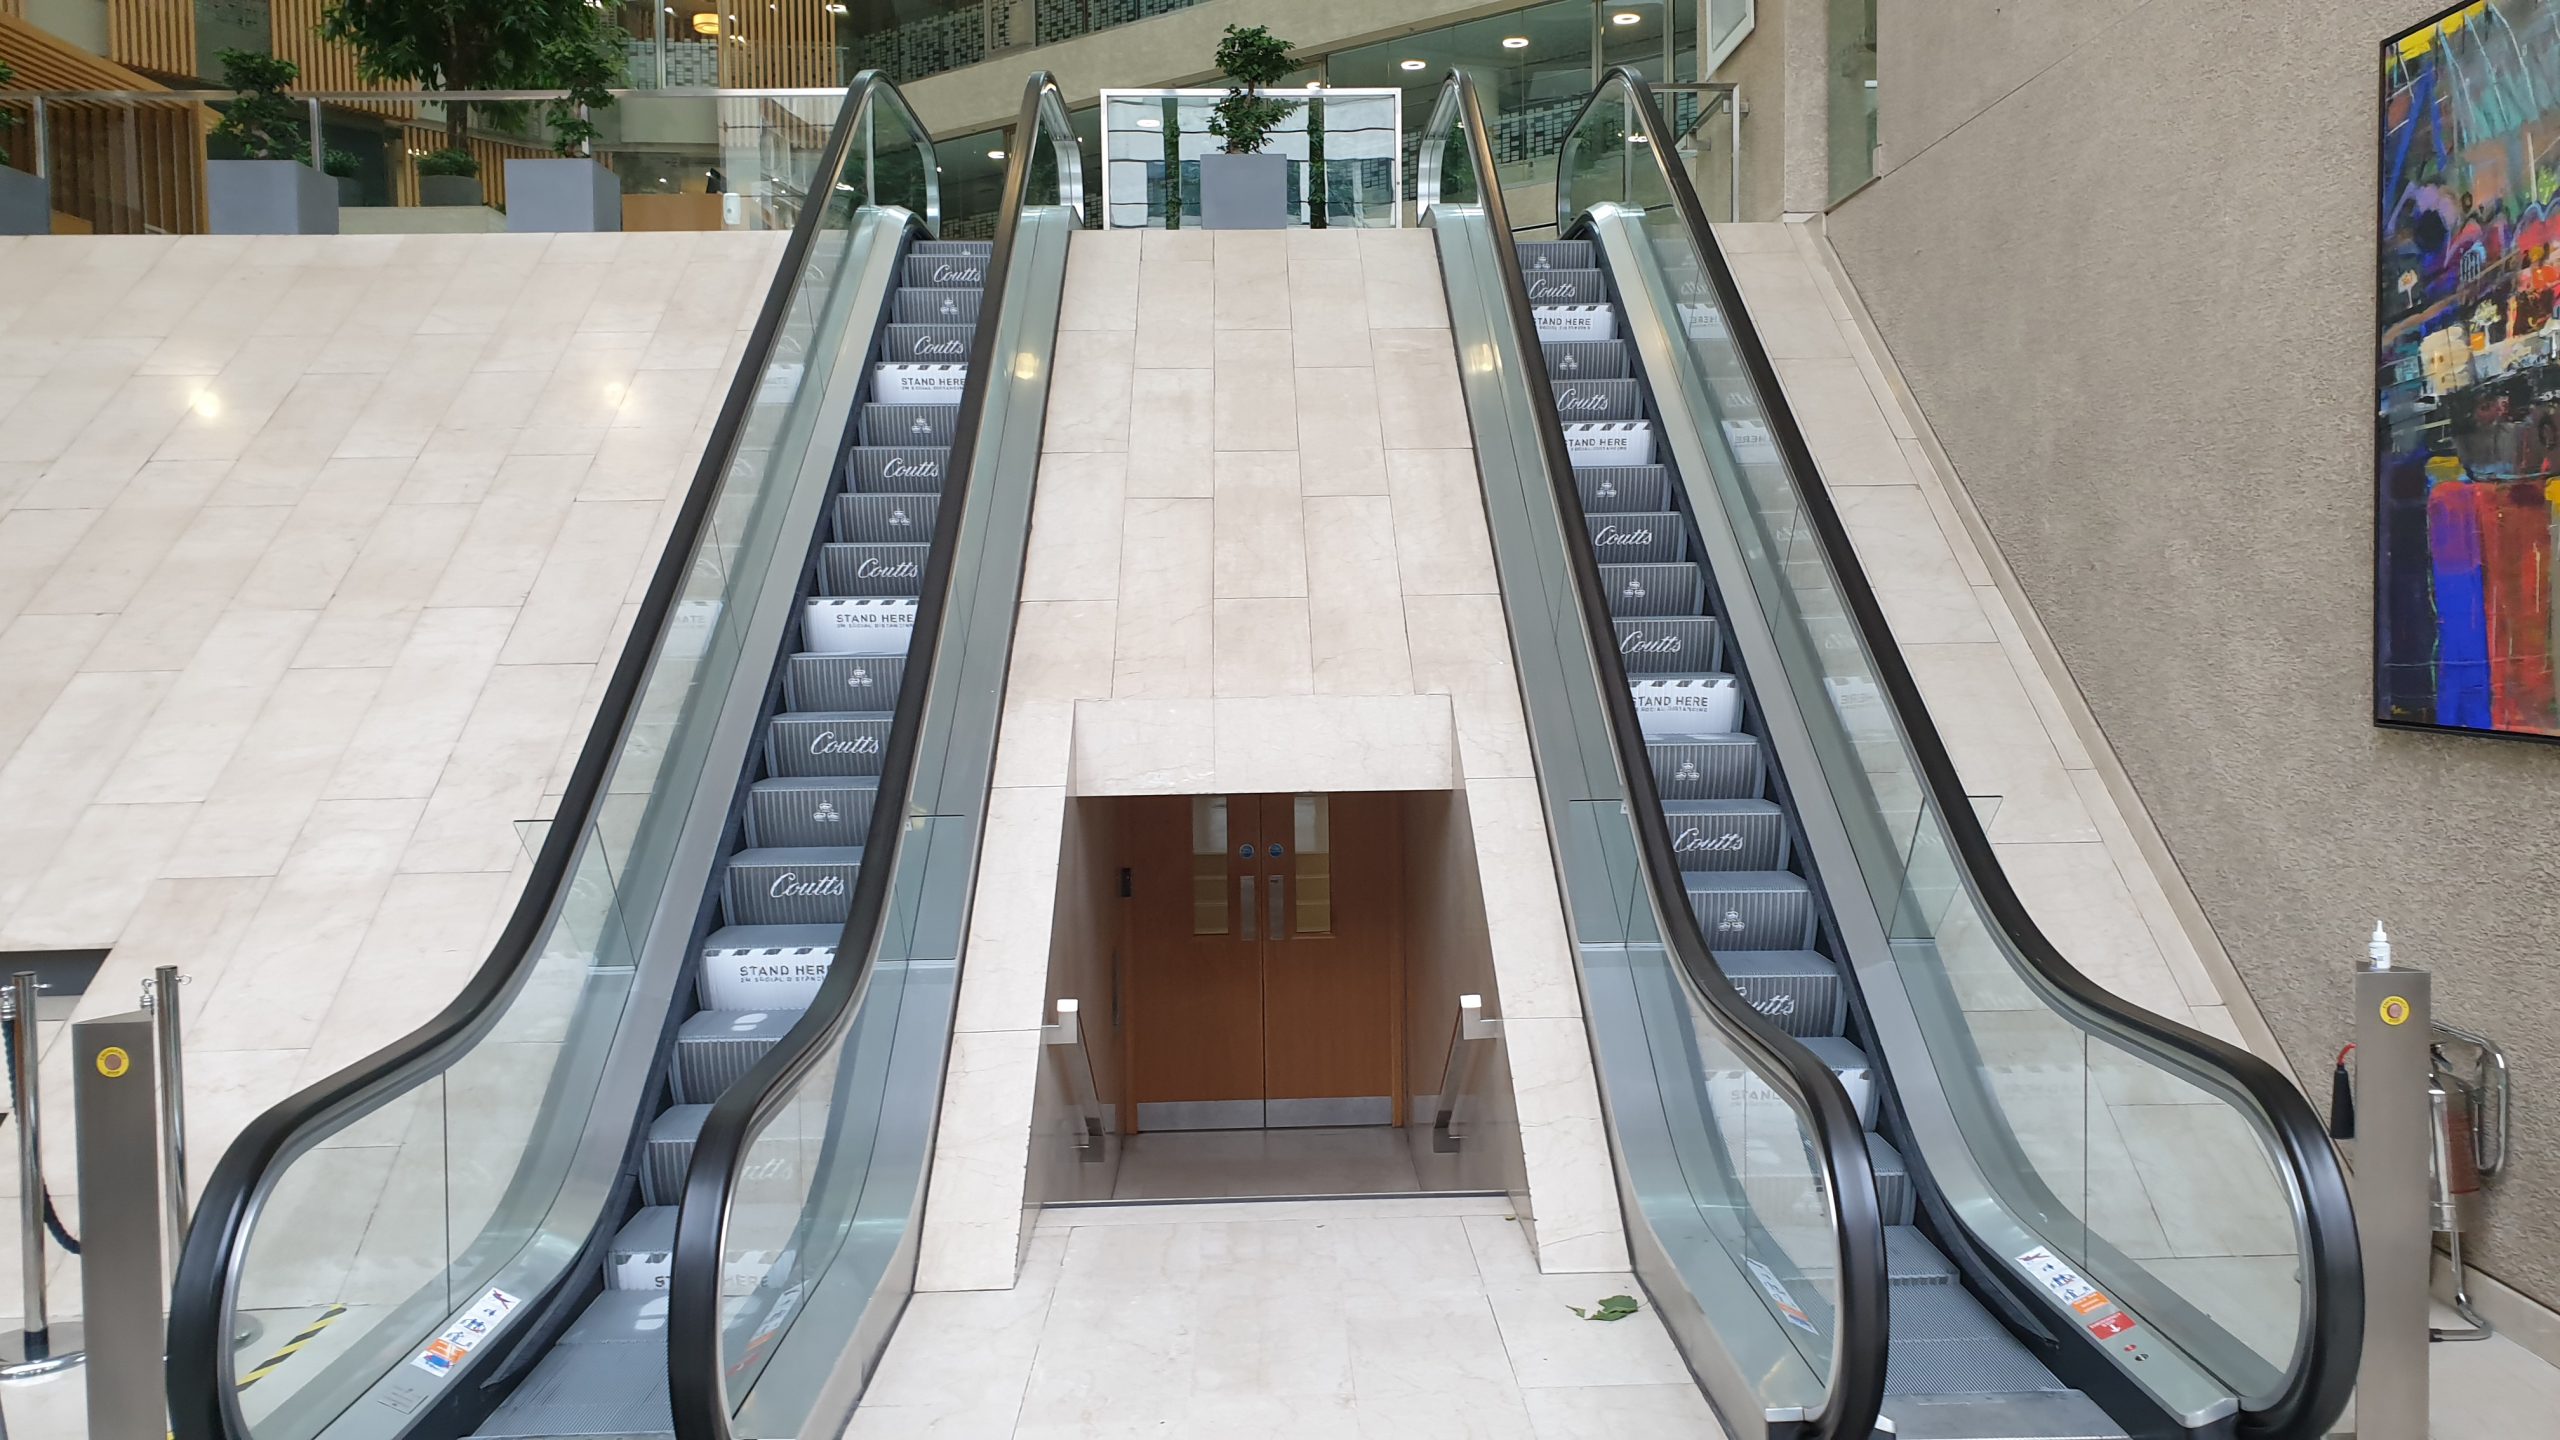 Coutts Bank Social Distancing Awareness Escalator Step Branding - Safety Graphics